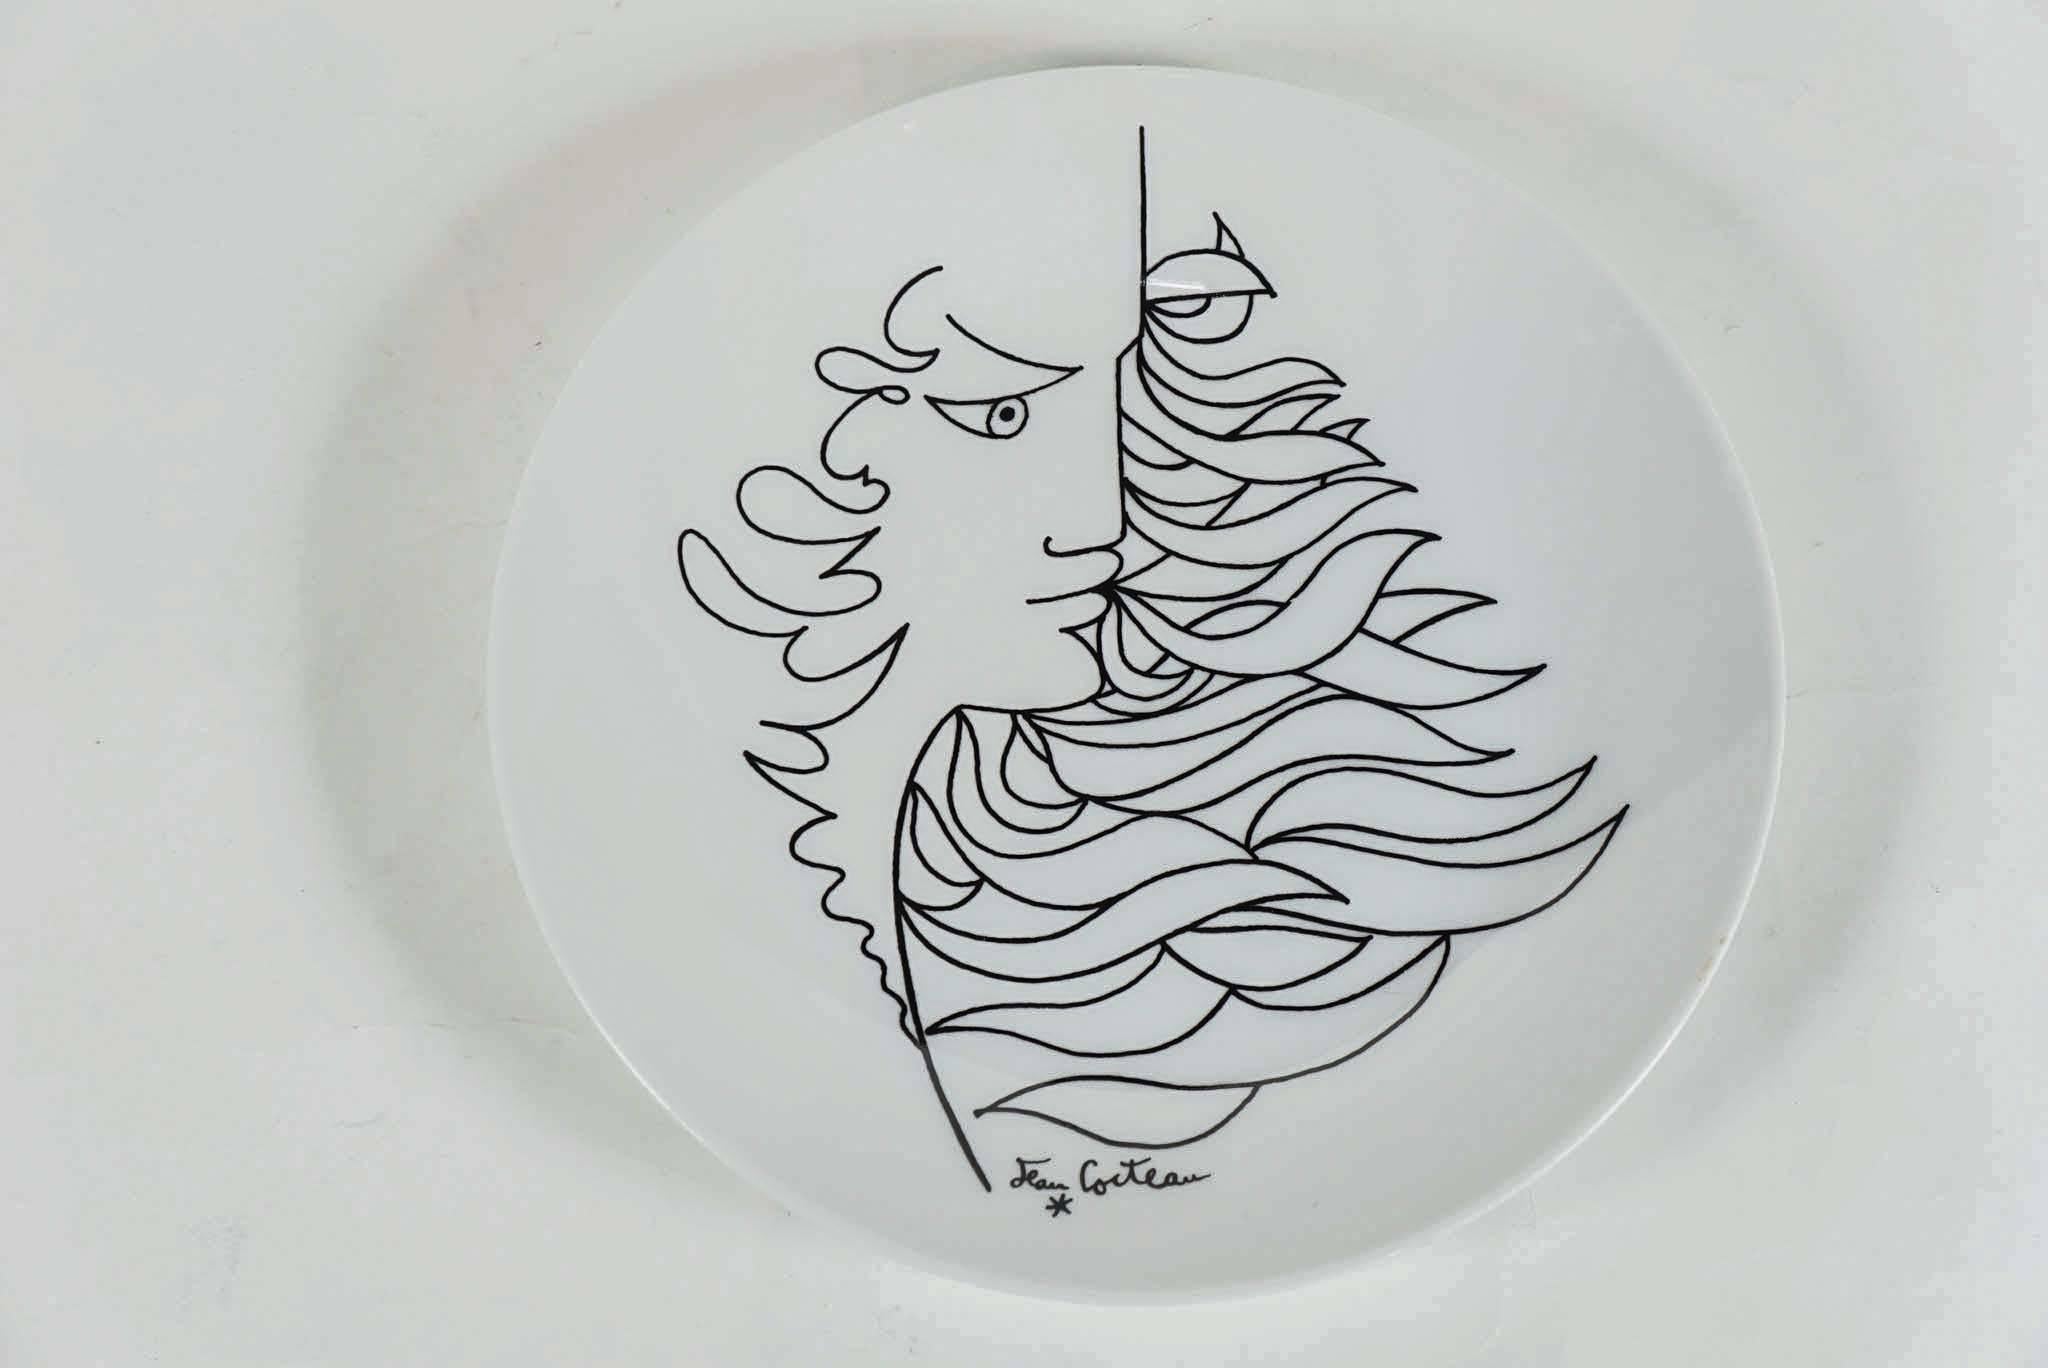 Porcelain Jean Cocteau Plates  by Promo Ceram and Picasso Plate by ECPLP